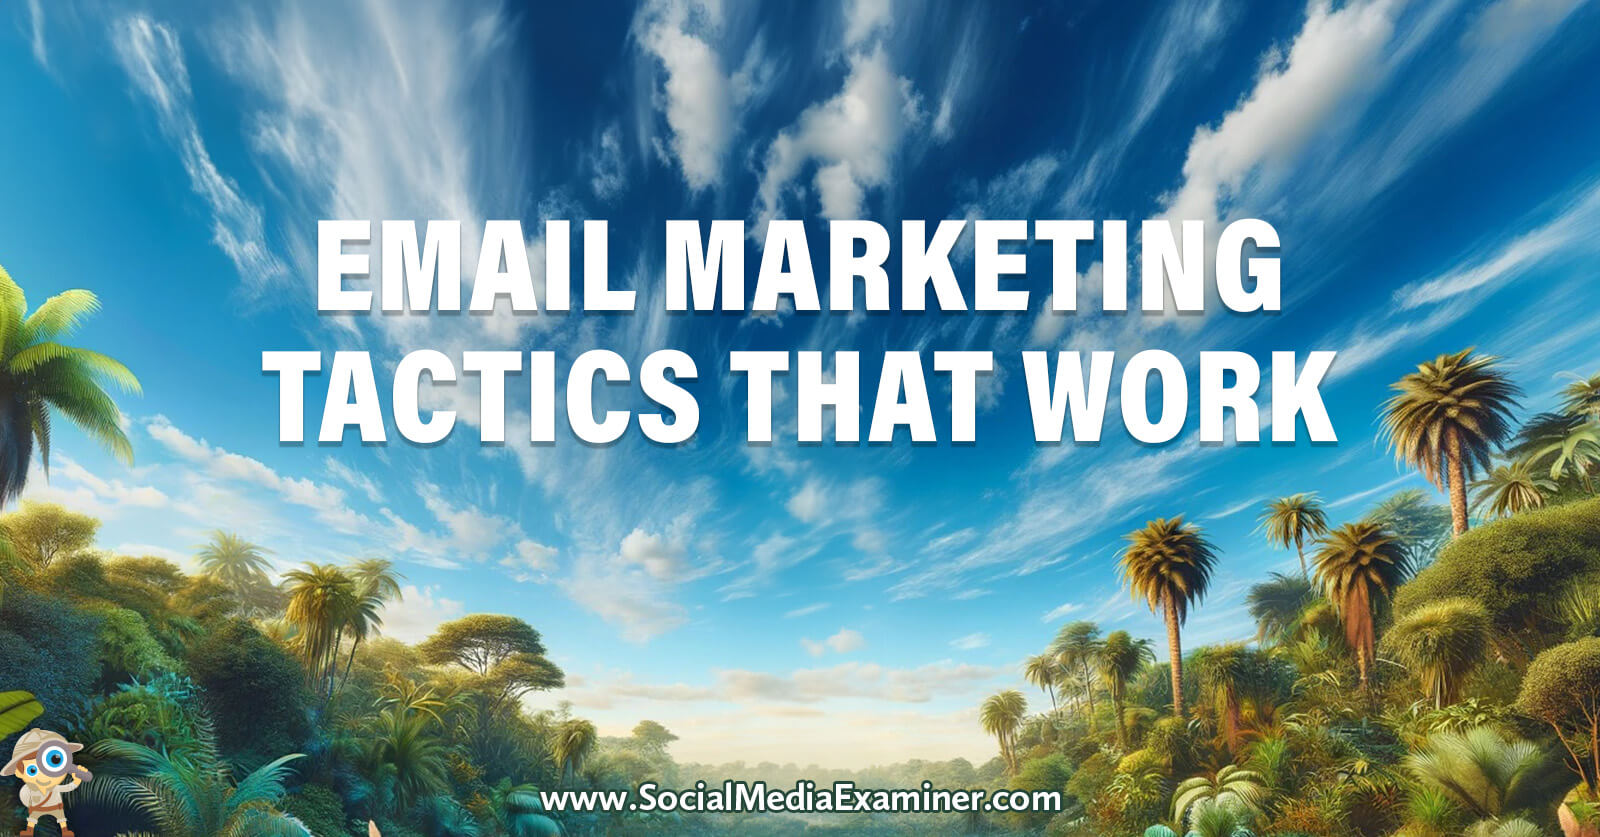 Email Marketing Tactics That Work by Social Media Examiner